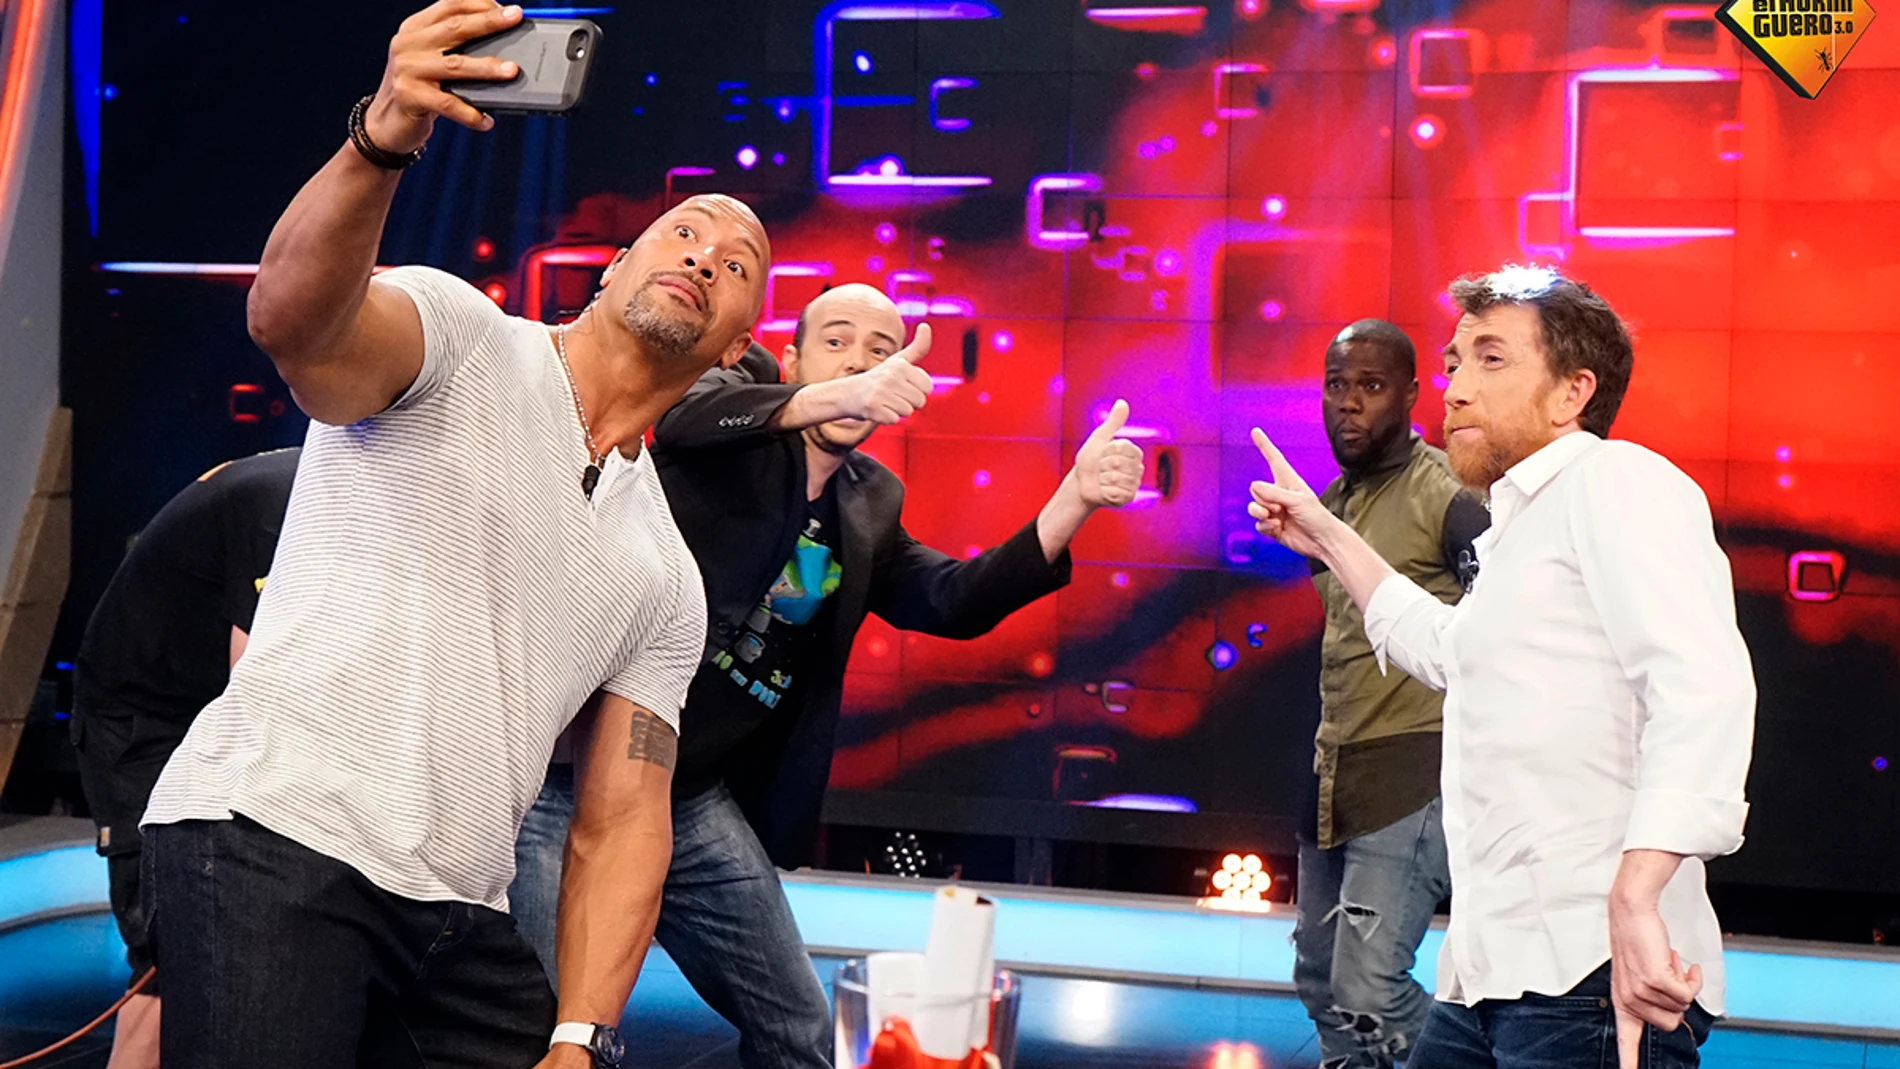 Jandro hace su test infalible a Dwayne Johnson y Kevin Hart